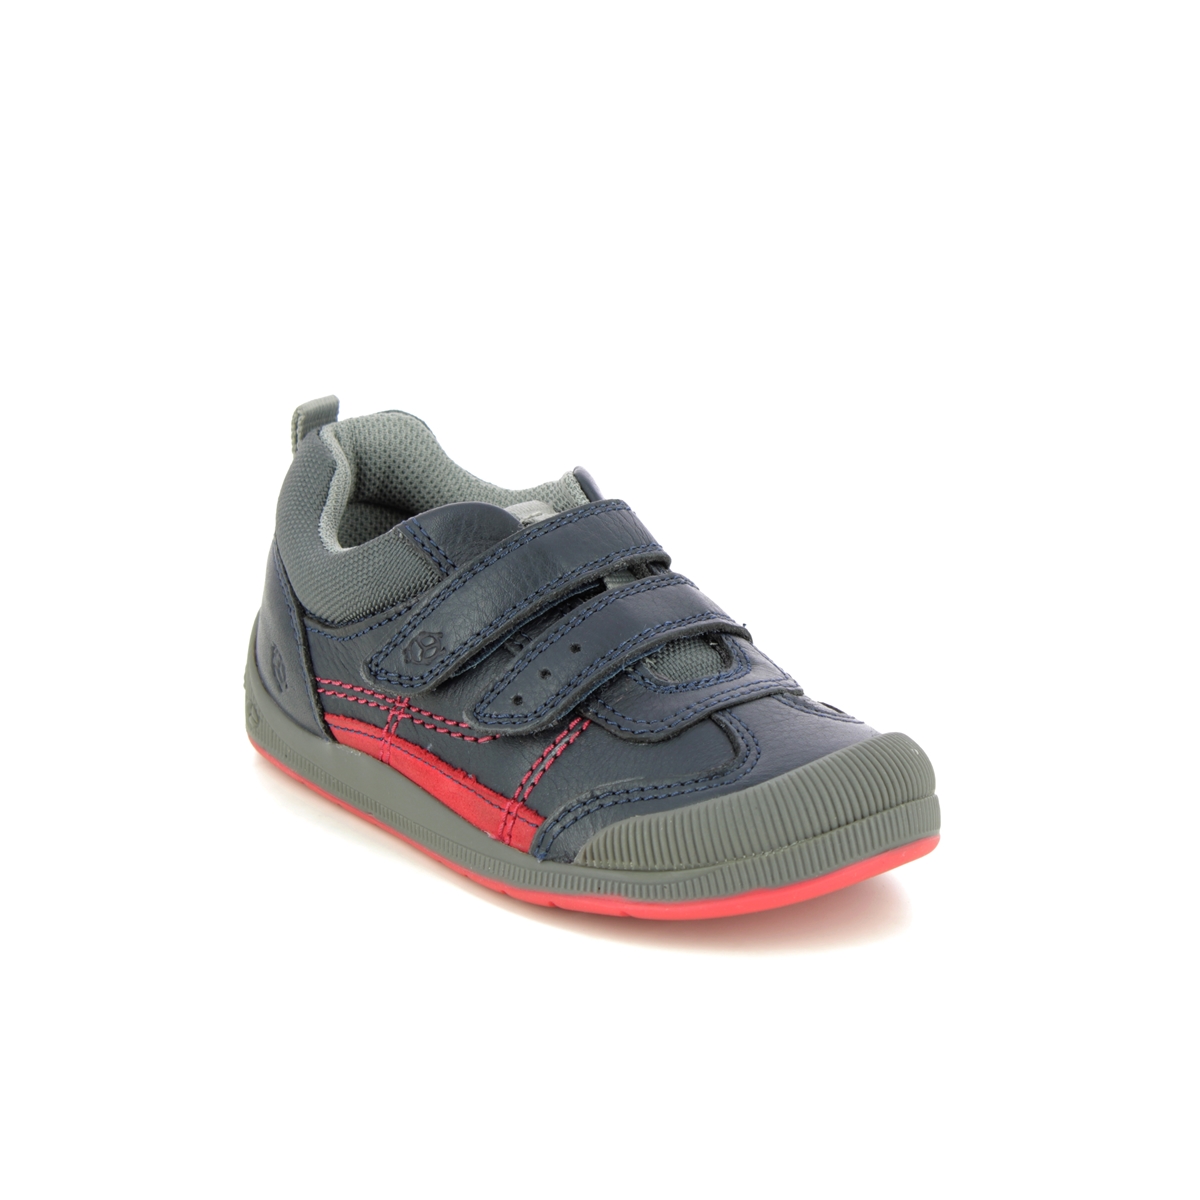 Start Rite - Tickle In Navy Leather 1731-96F In Size 10.5 In Plain Navy Leather Boys First And Toddler Shoes  In Navy Leather For kids